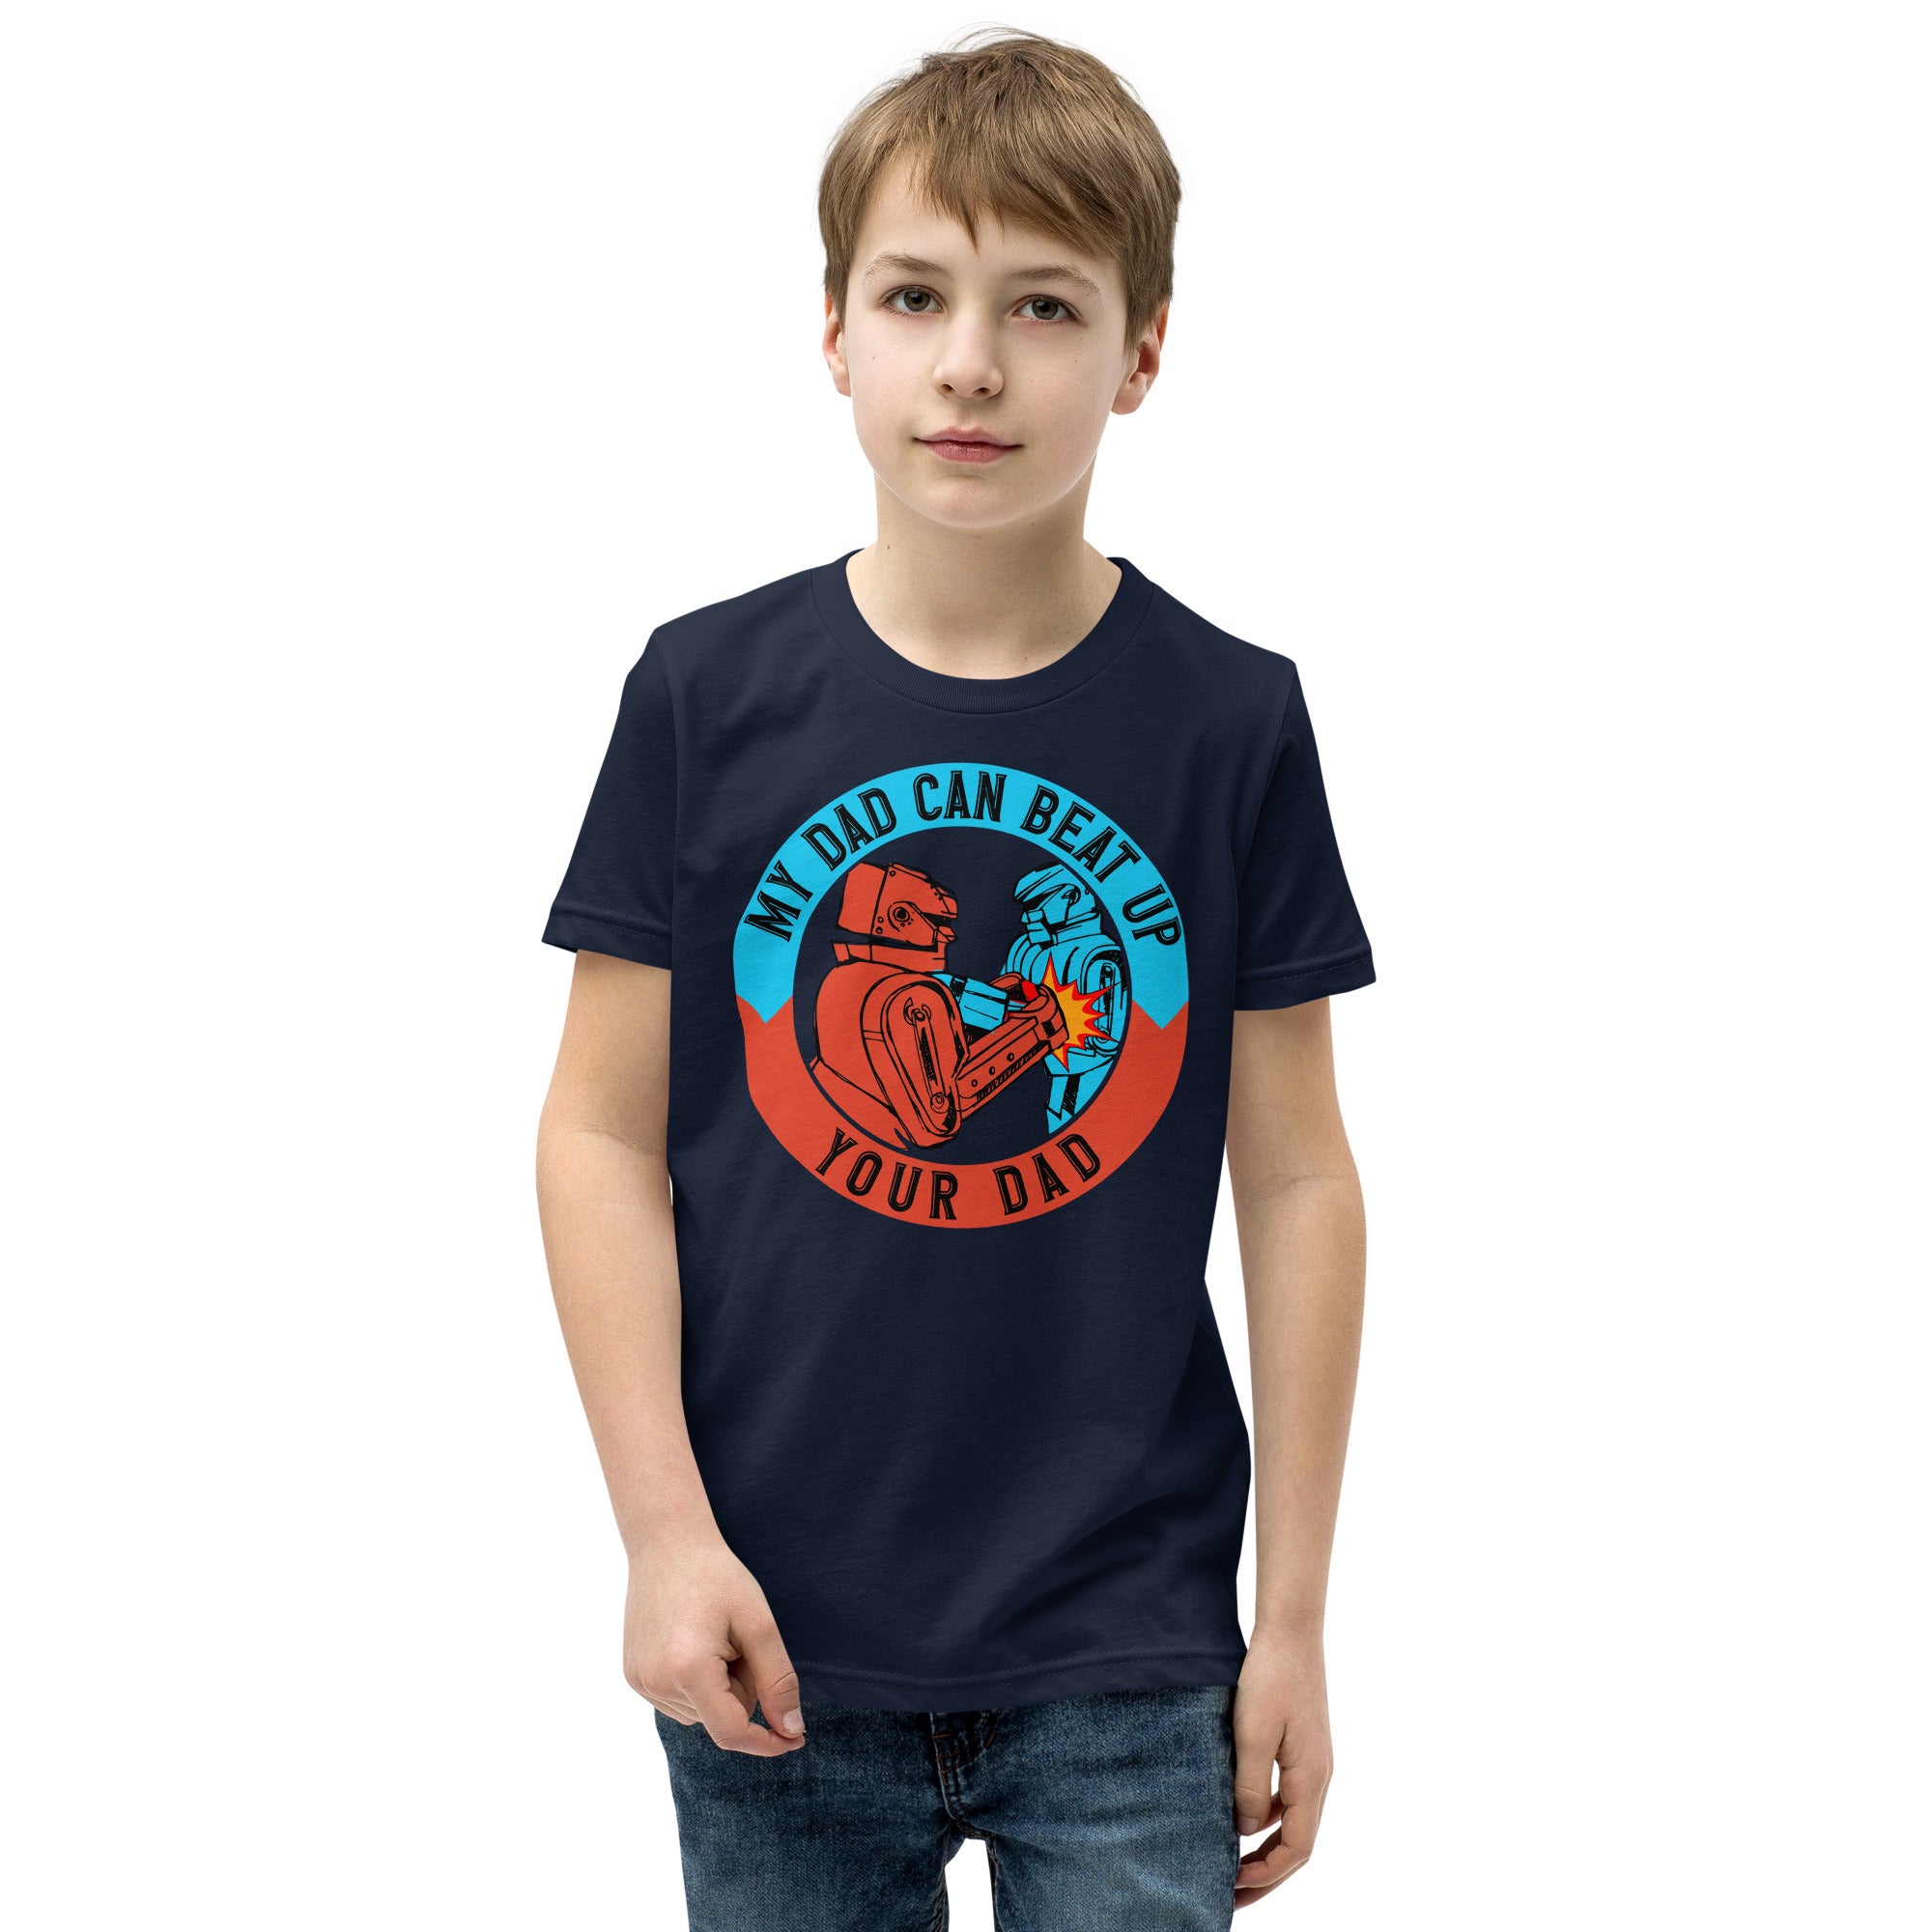 My Dad Can Beat Up Your Dad - Youth Short Sleeve T-Shirt